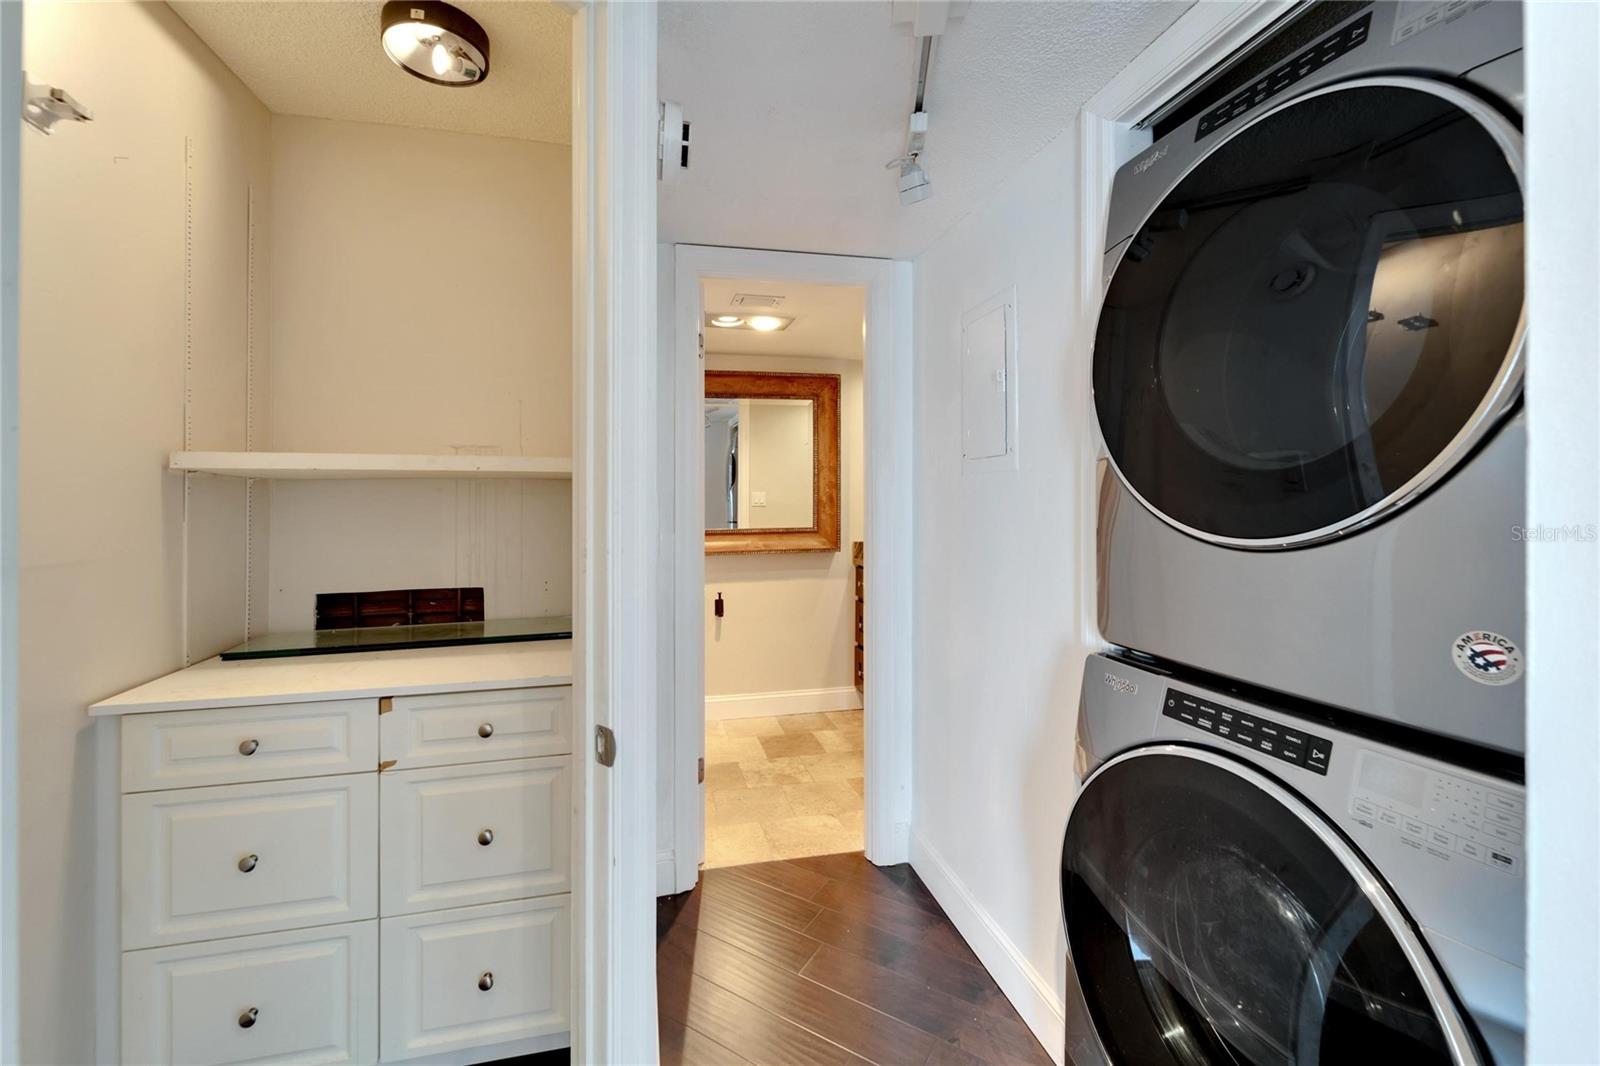 PASS THROUGH UTILITY AREA BY THE 2ND BEDROOM AND BATH WITH EXTRA STORAGE CLOSET